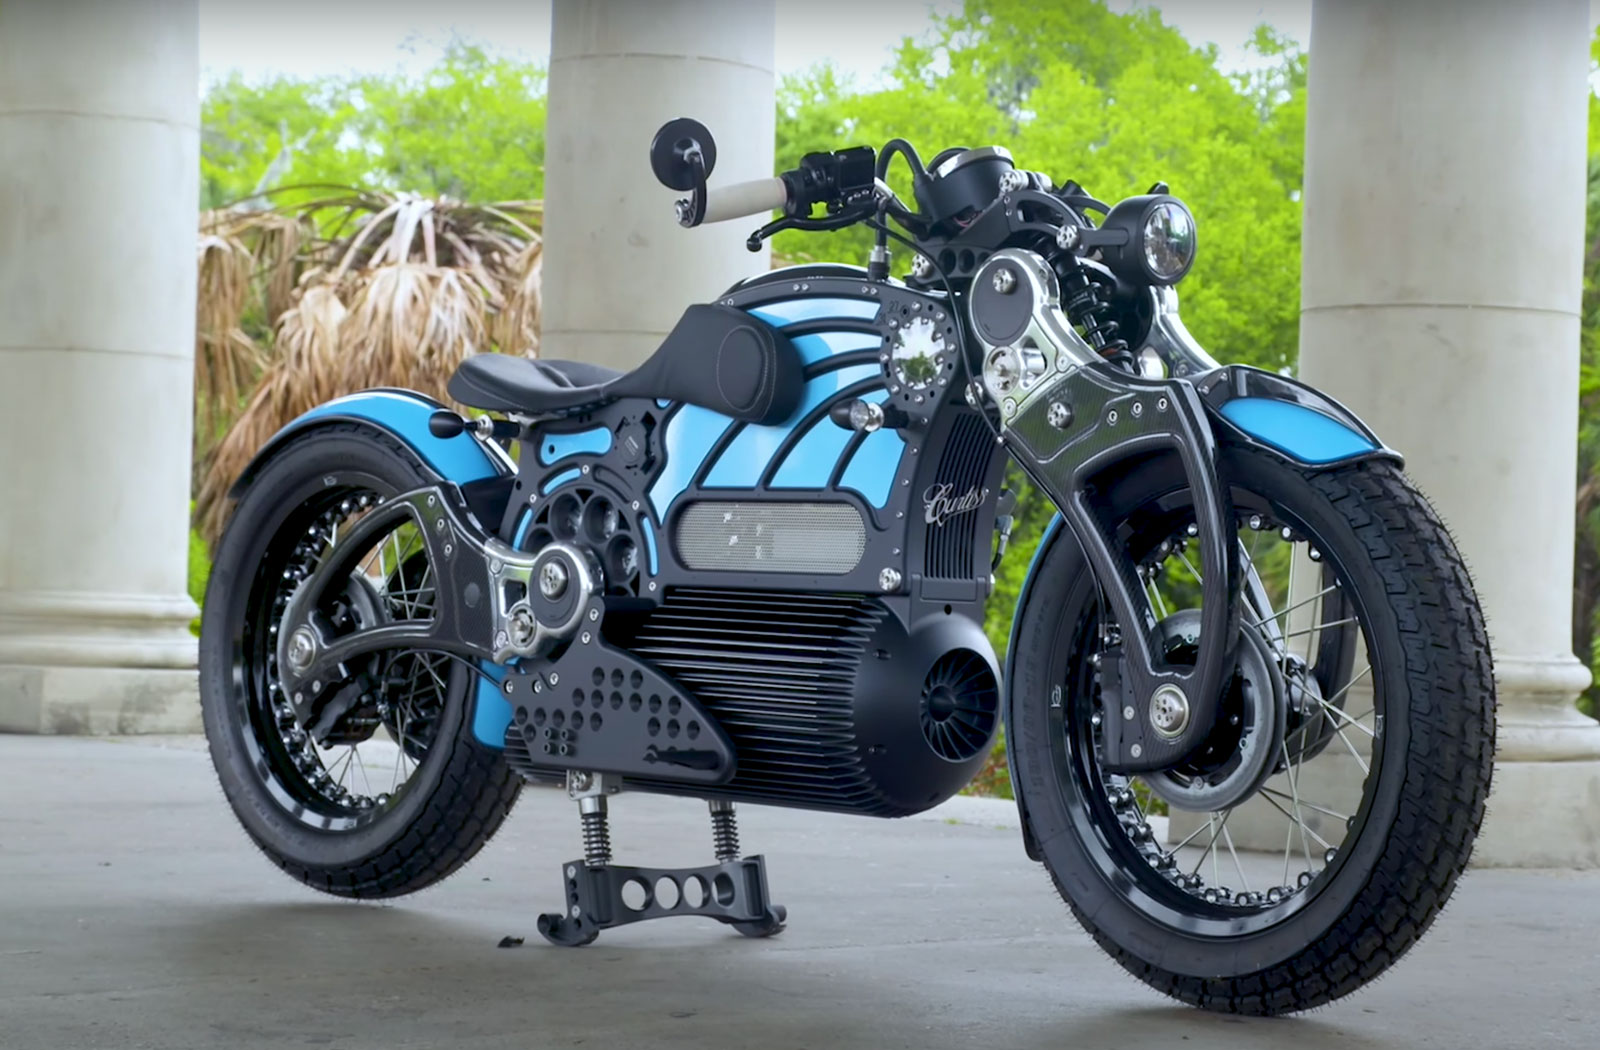 The Opposite of Death – The Curtiss 1 Electric Motorcycle Story